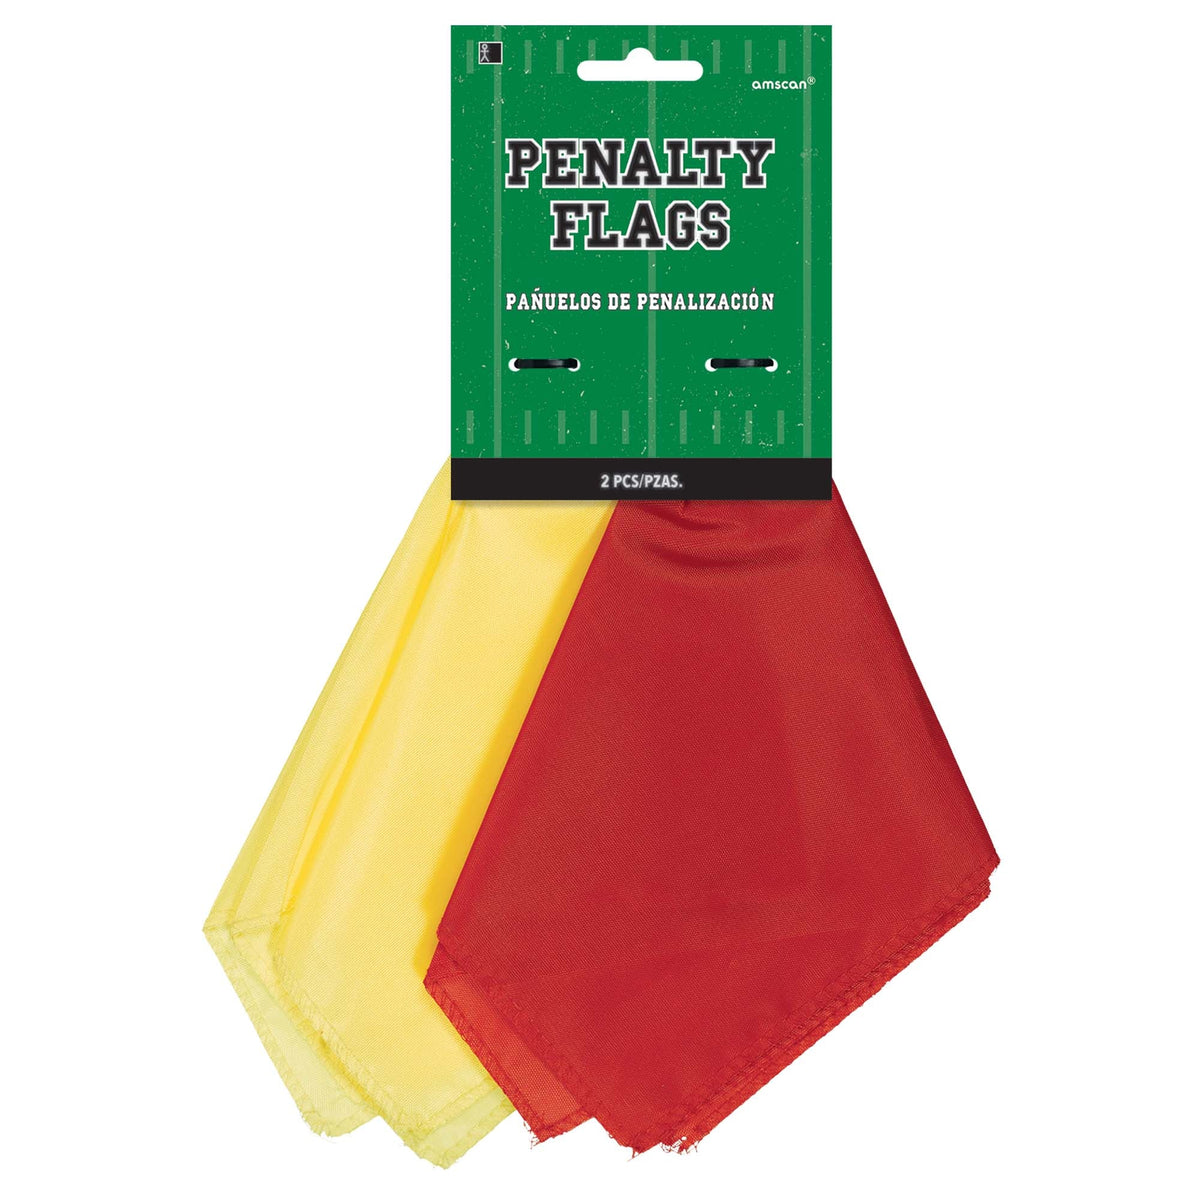 Penalty and Challenge Flags 9 1/4" x 5 1/2"